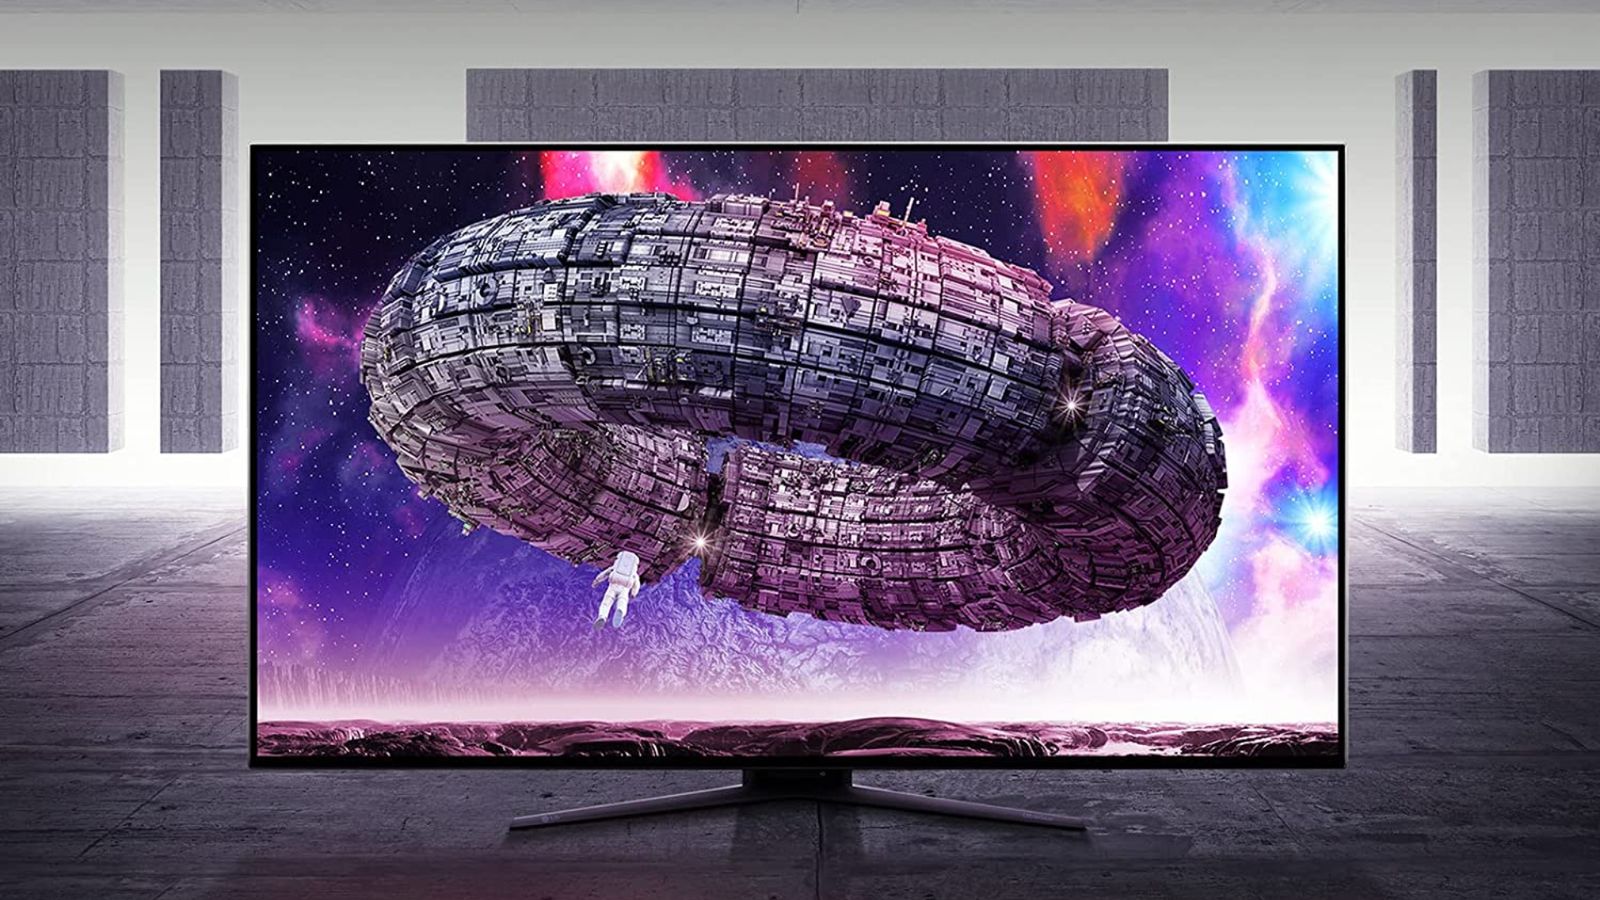 Image of an LG Ultragear monitor with a circular space ship on the display.